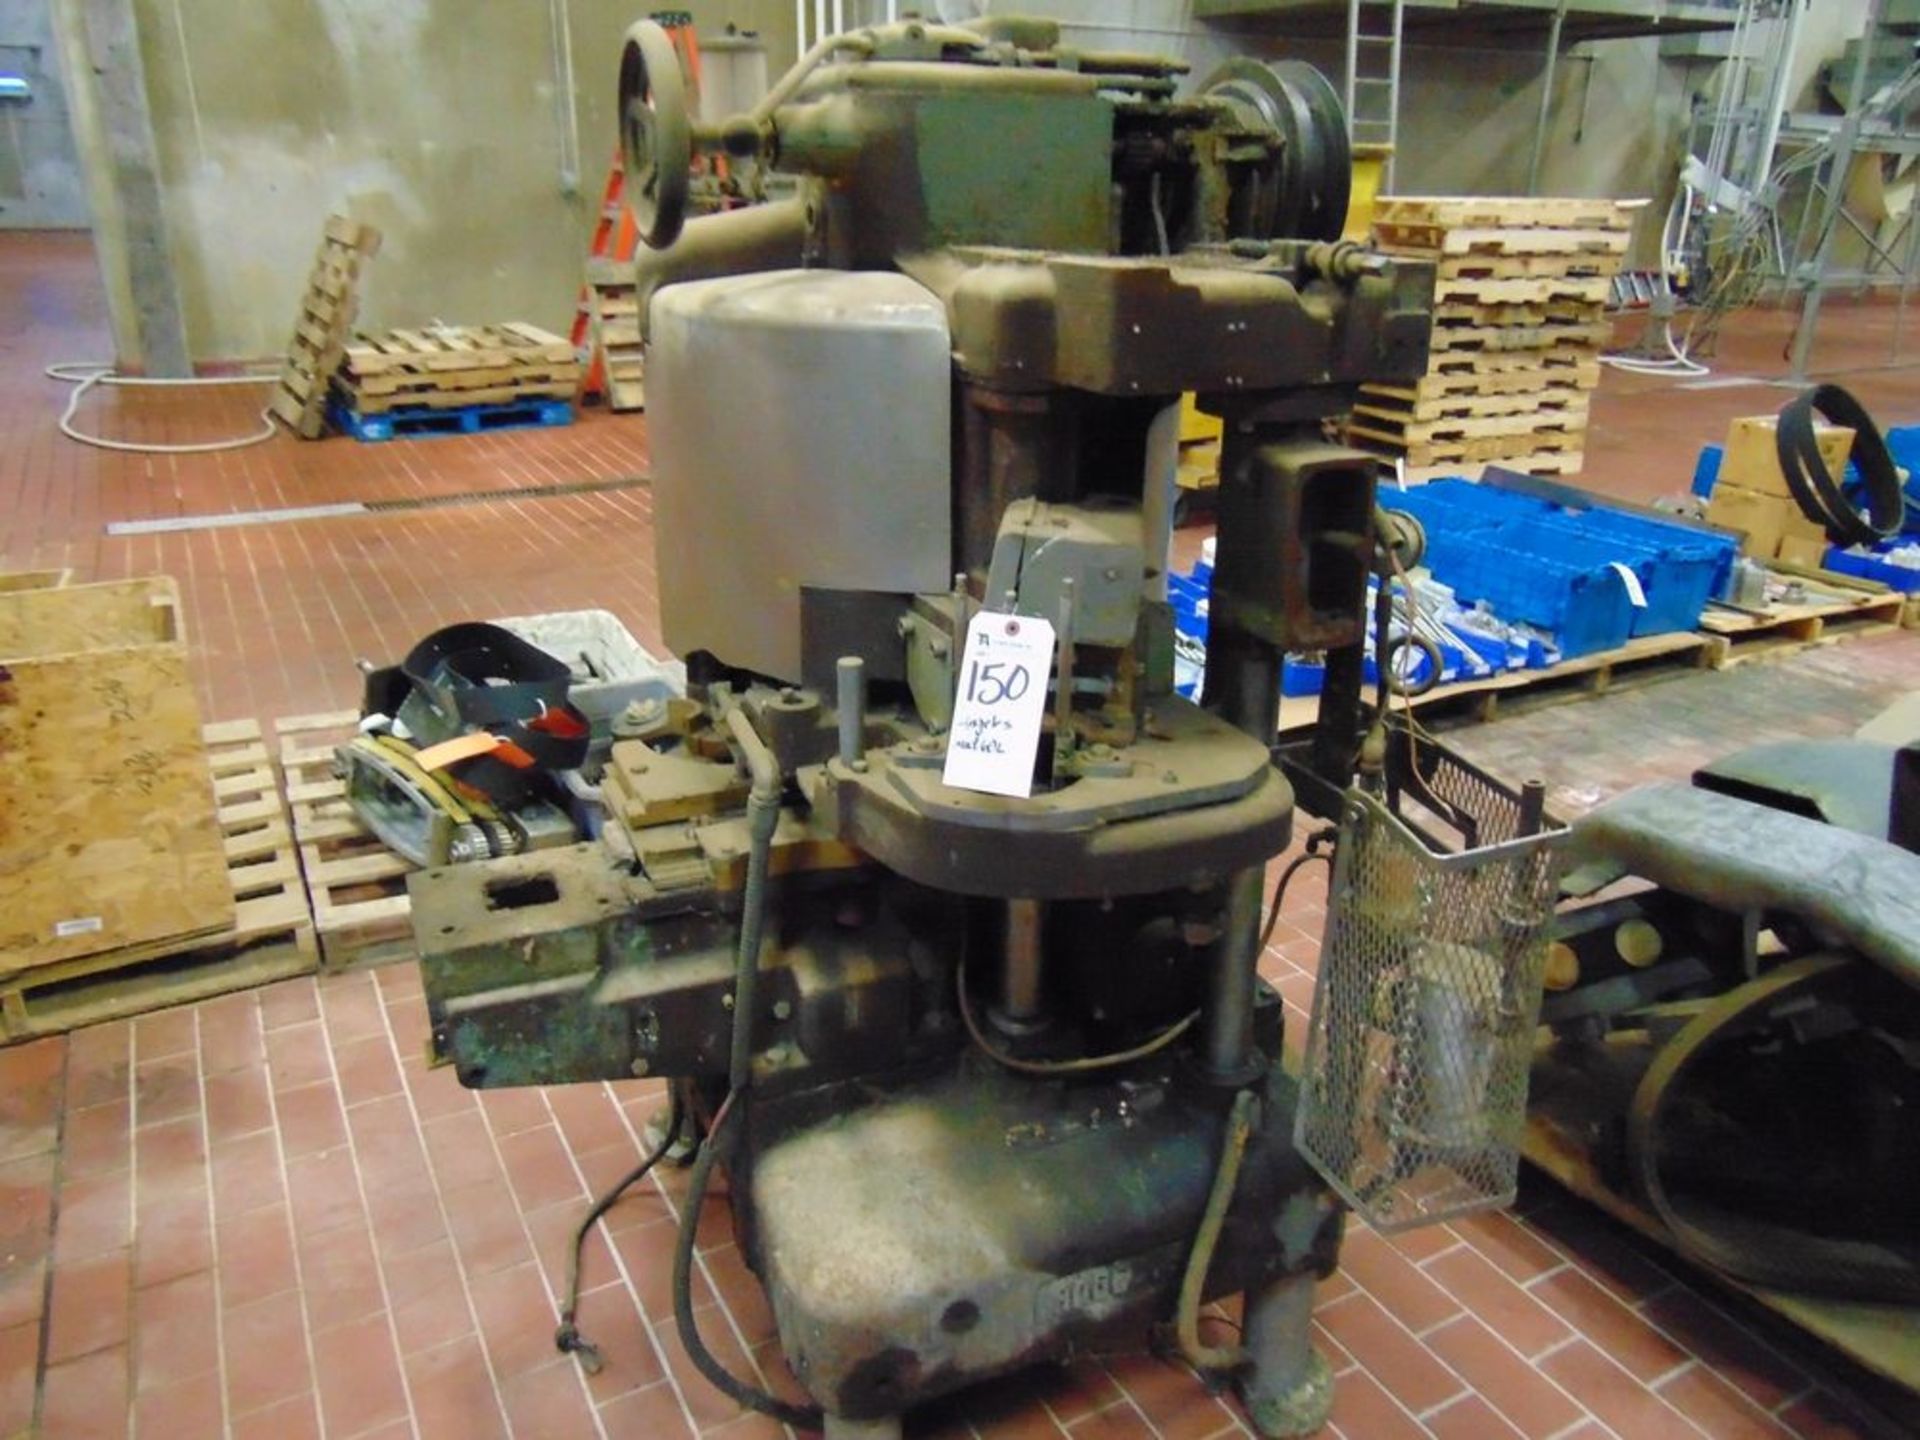 Angelus 60LSeamer, 300x407 Cans, Steam Flow, Driven Lifters, Single Knife Separator, Topper,